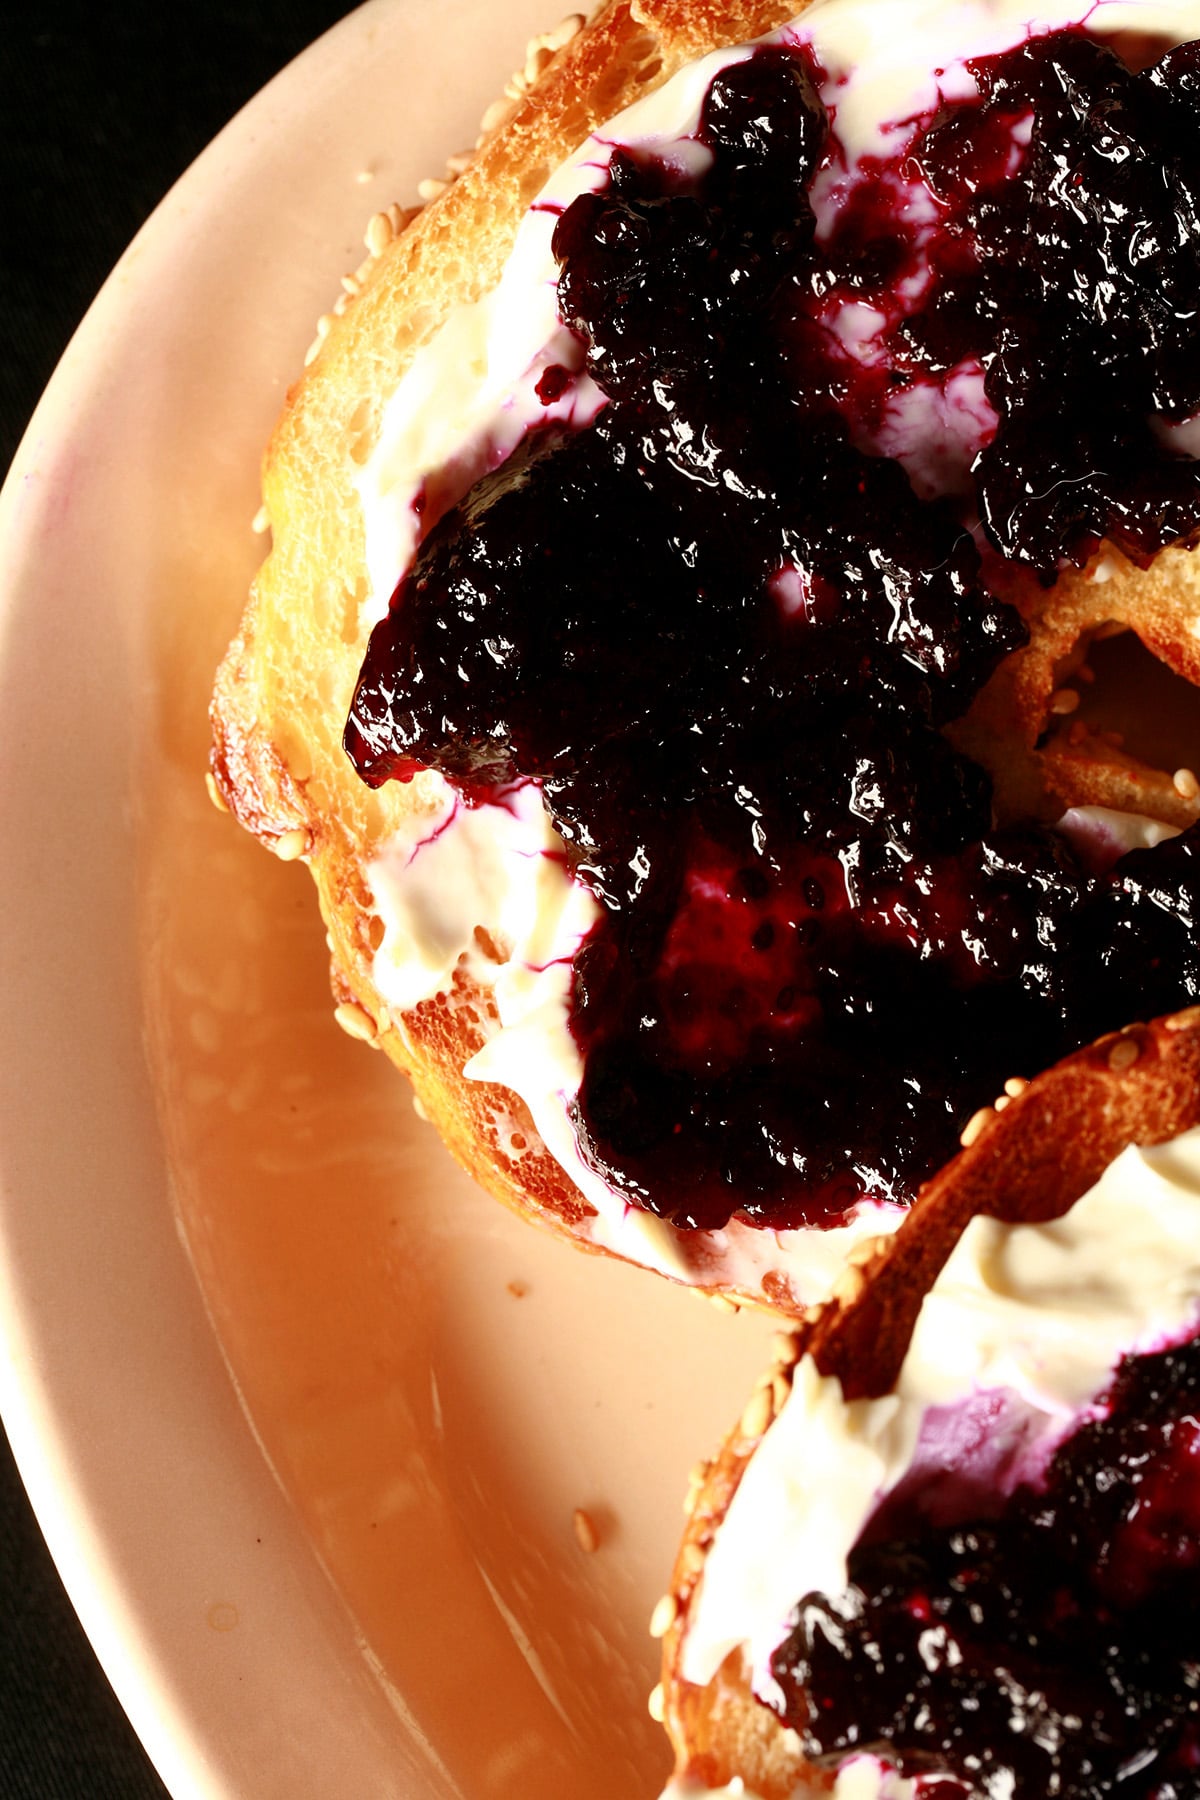 A bagel spread with cream cheese and topped with this small batch blueberry jam.